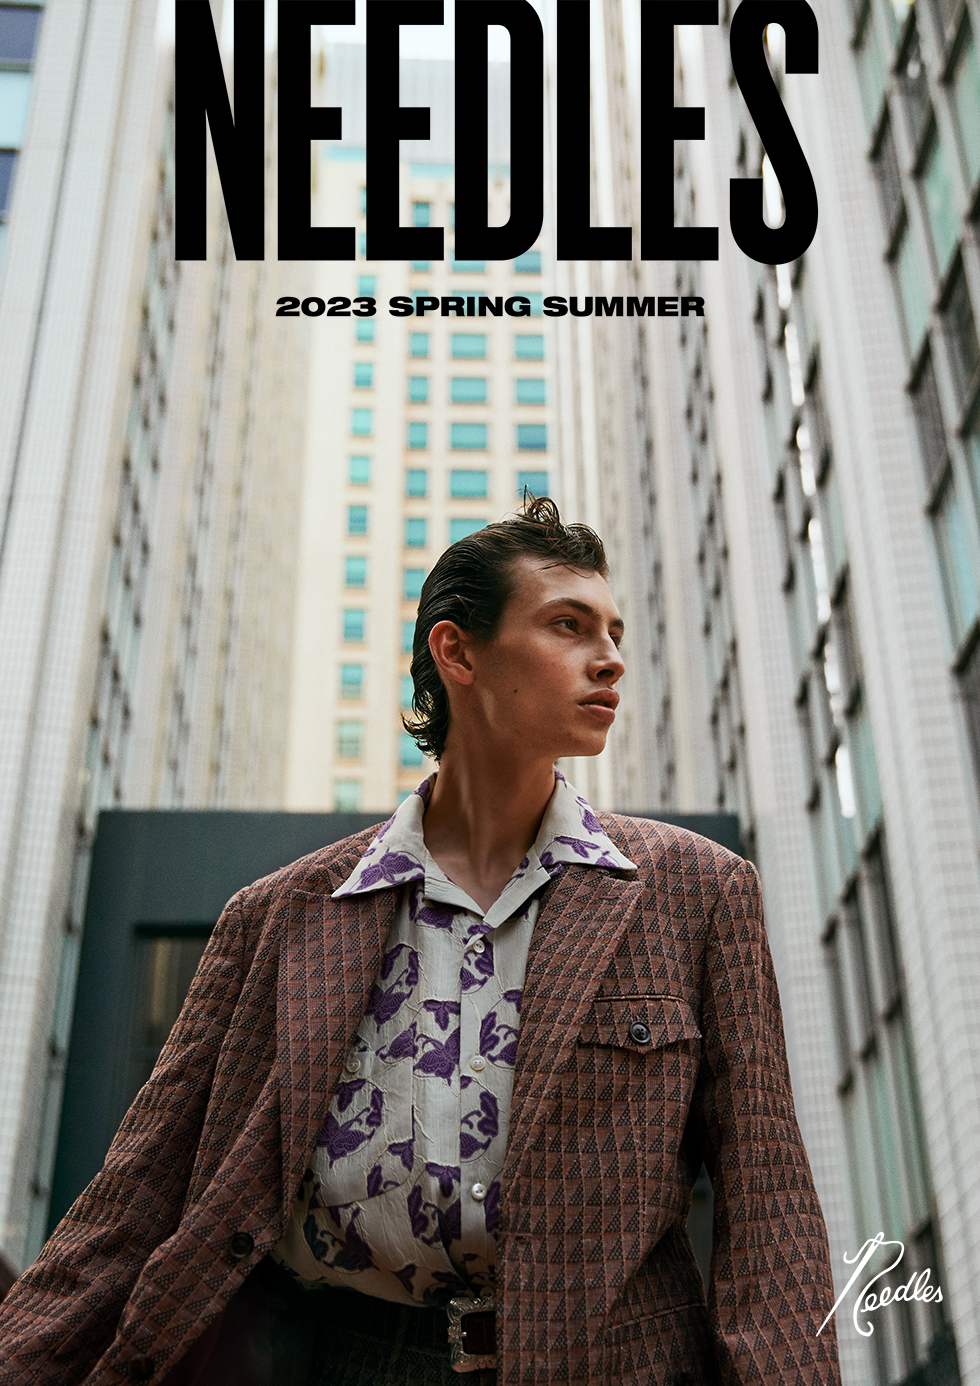 Needles official website | COLLECTIONS | 2023 Spring Summer